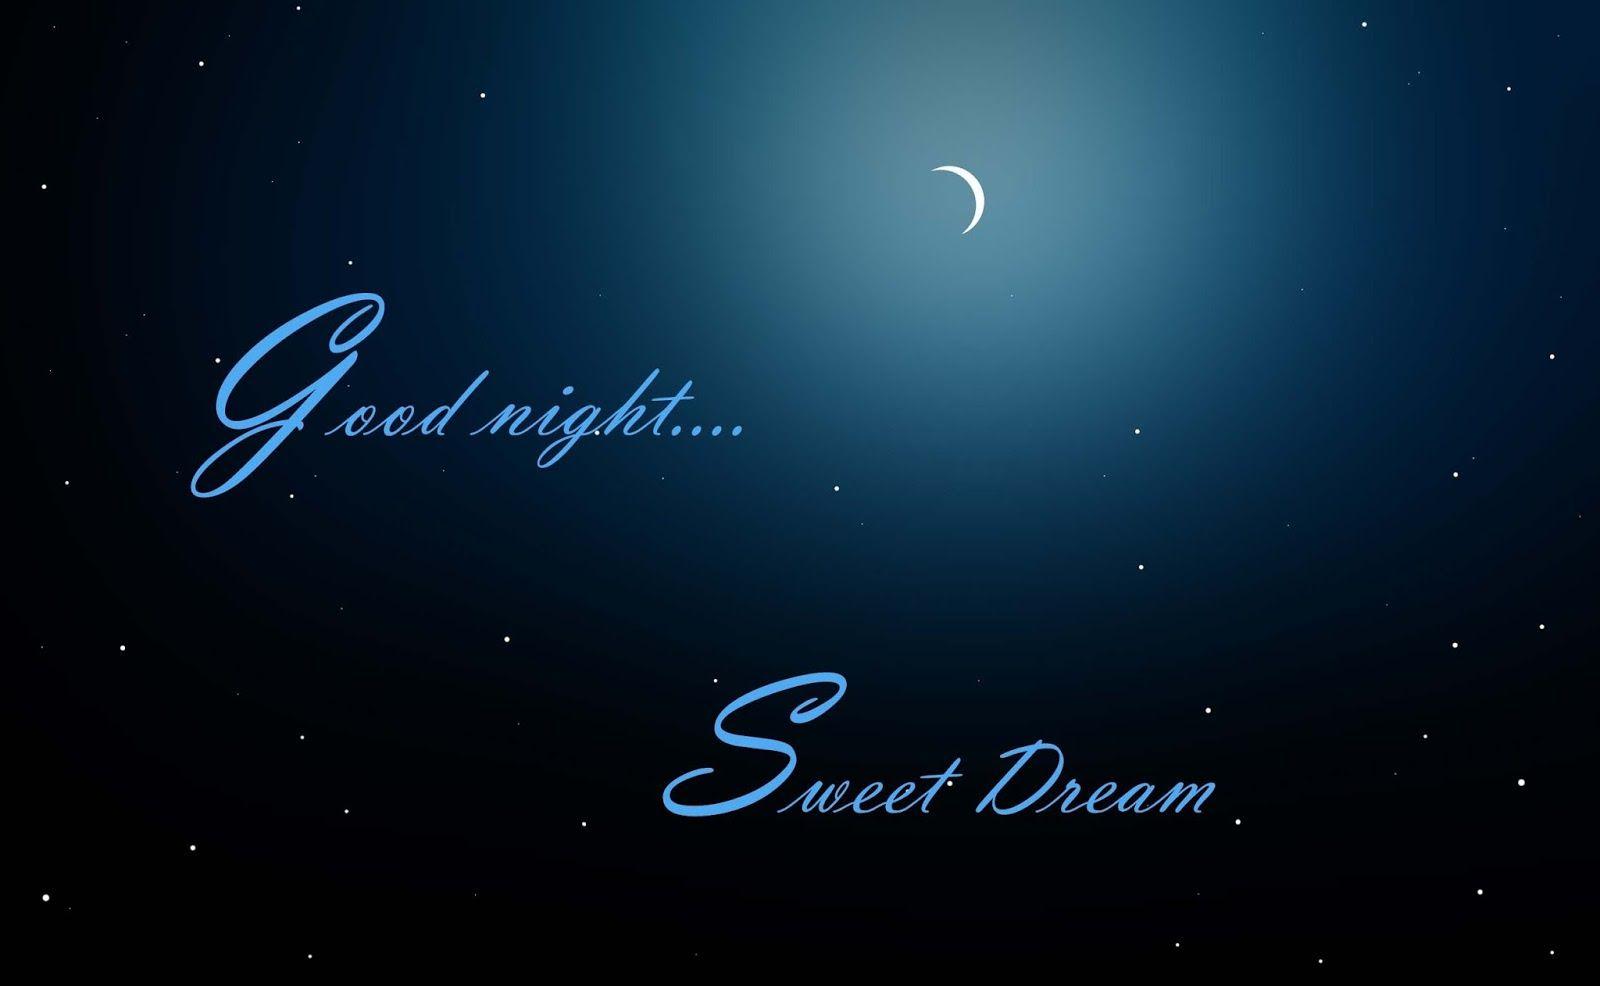 Best Good night HD Image, 3D Picture, Photo, Quotes, Wallpaper